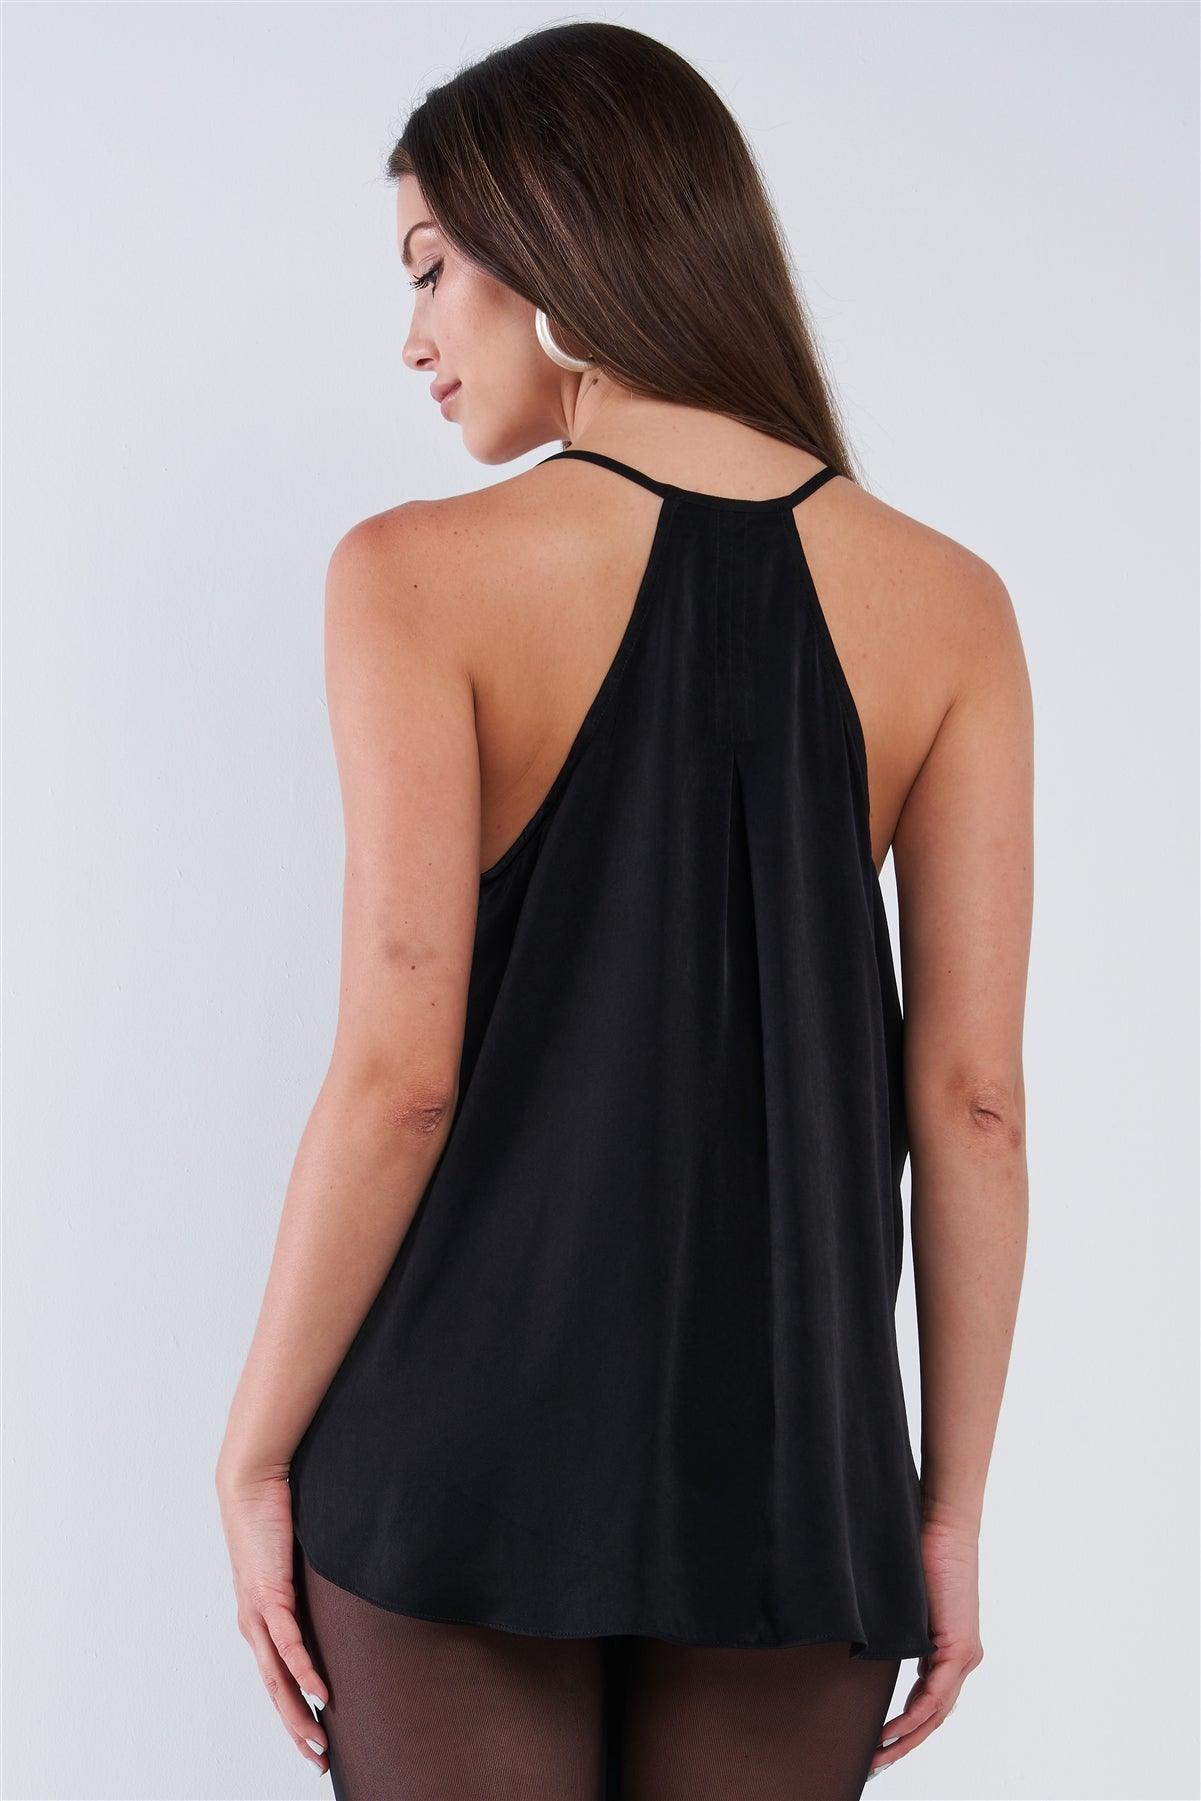 Black Satin Loose Fit Sleeveless Deep Plunge Double Wrap V-Neck Top /3-2-2